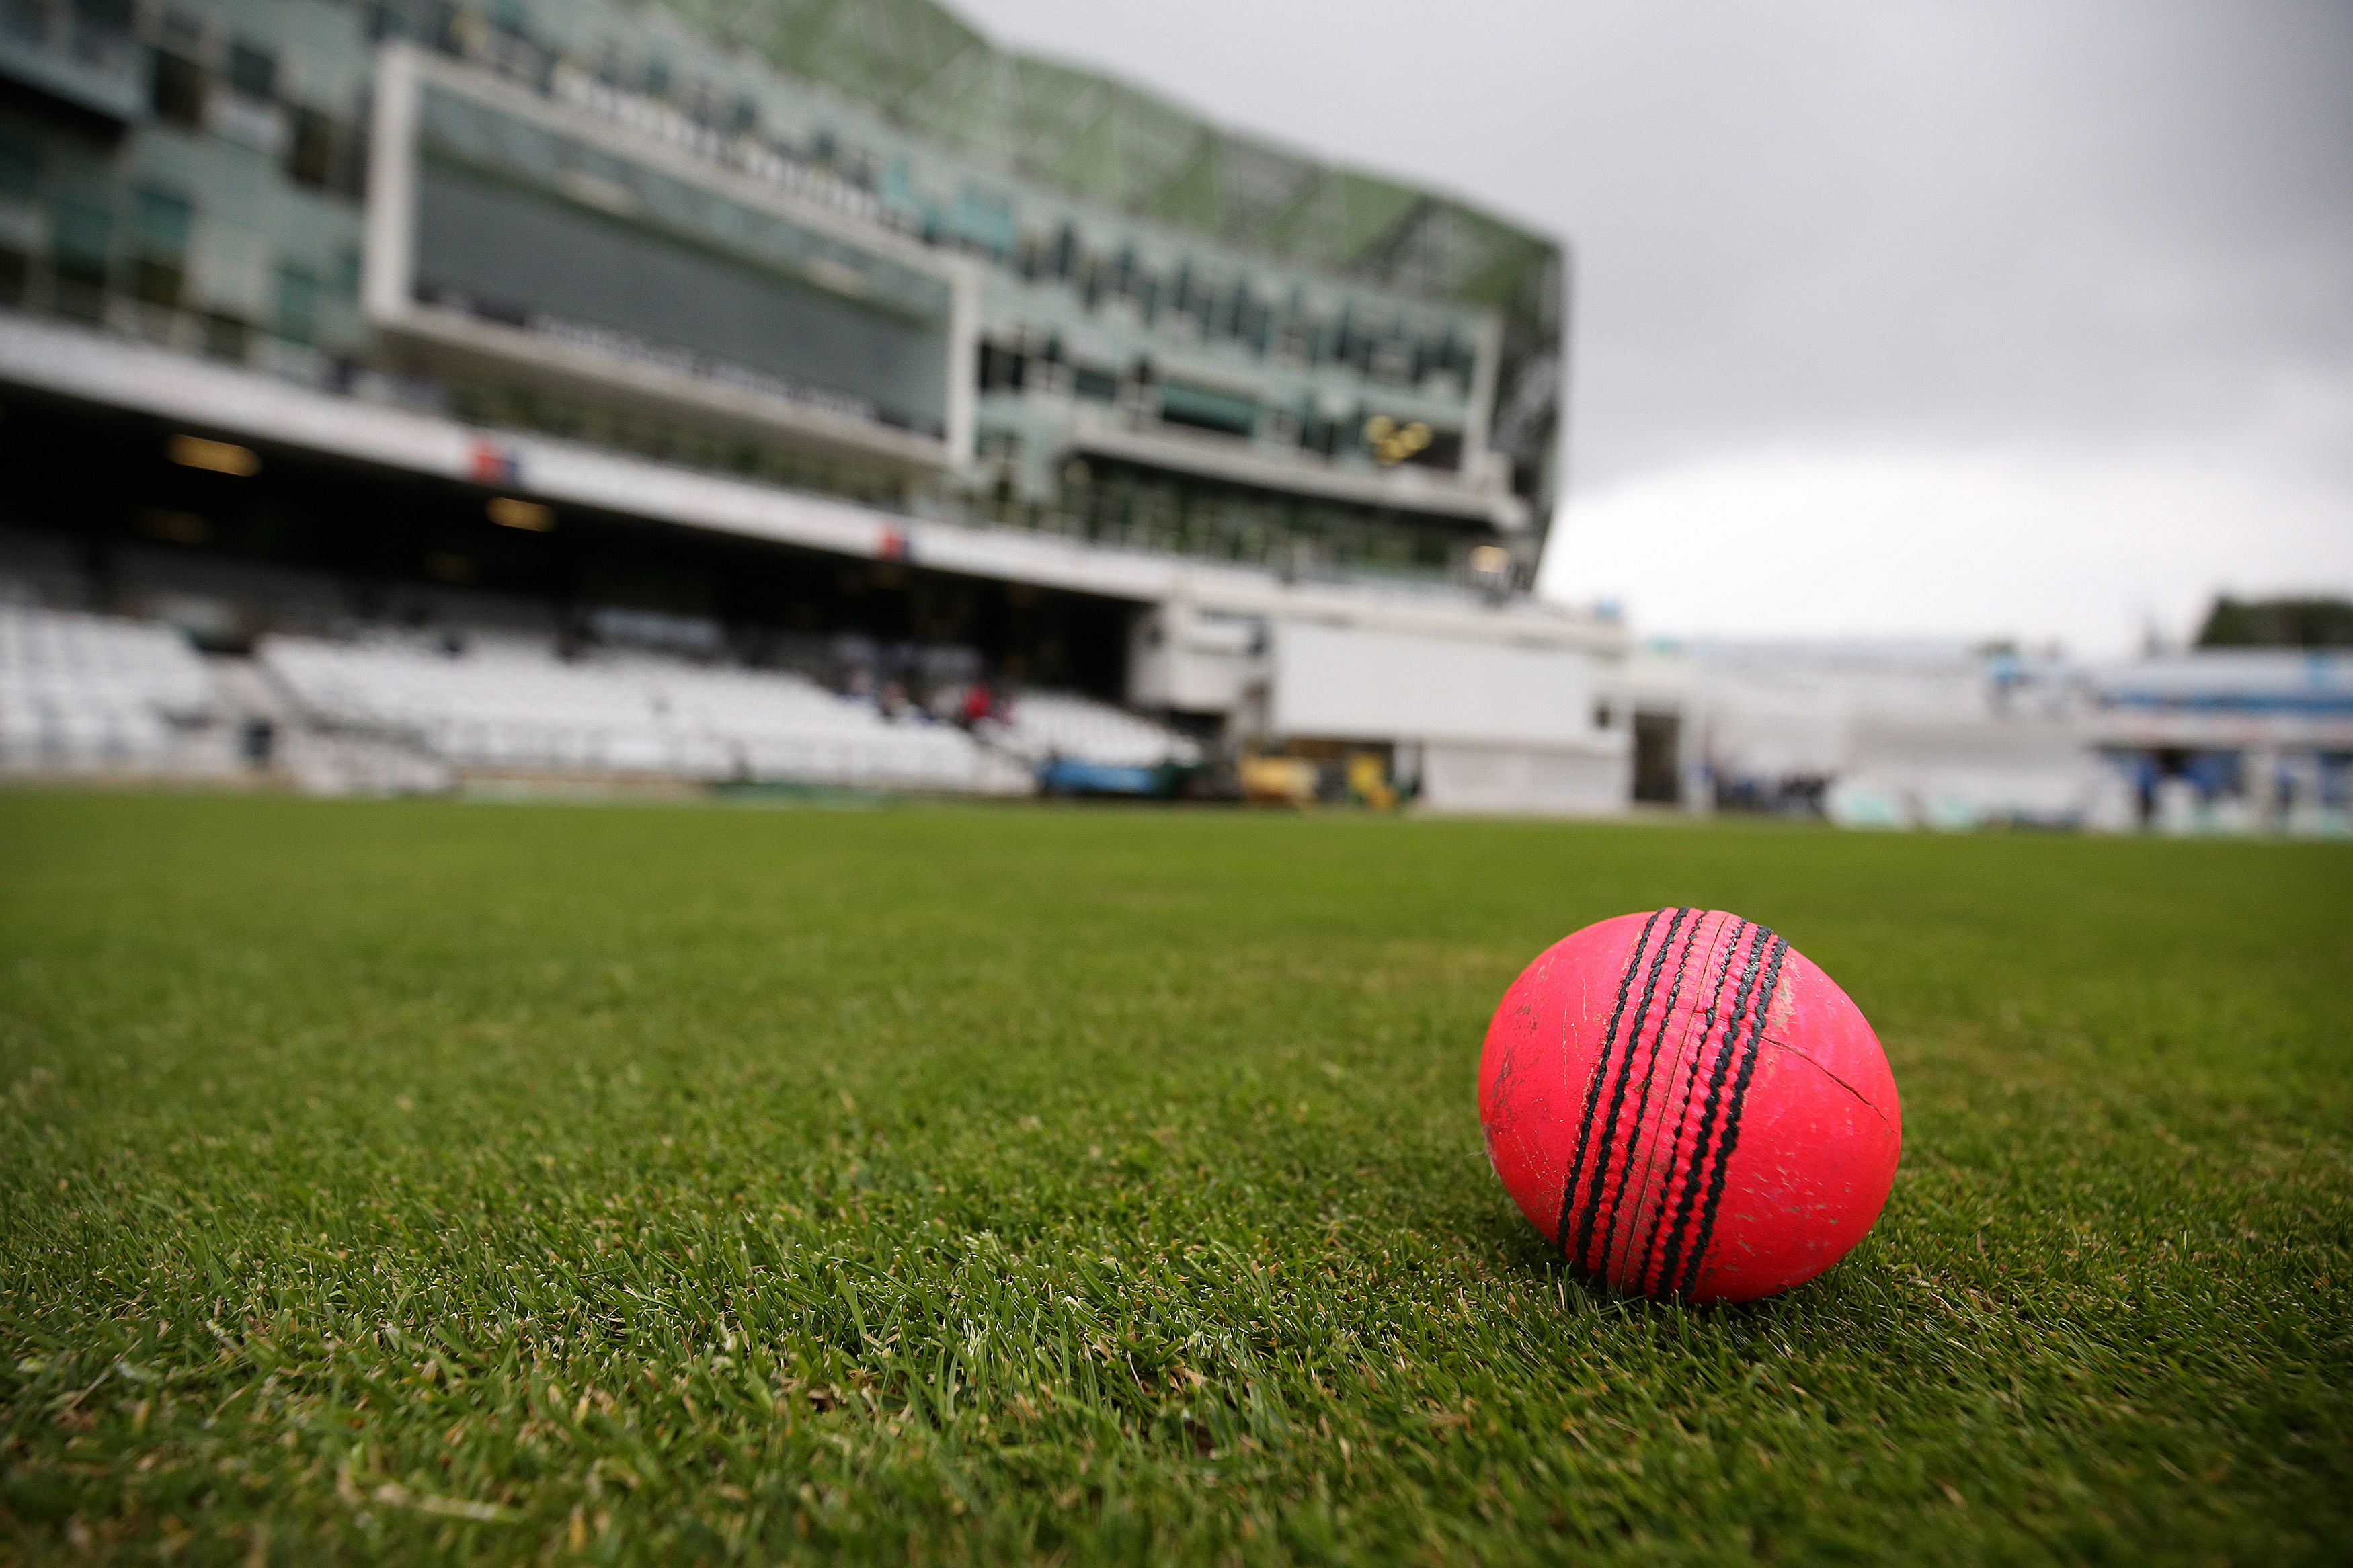 Producing a ball fit for a Test match under lights is a big challenge for SG as its pink ball is yet to be tested in a competitive game. Photo/Getty